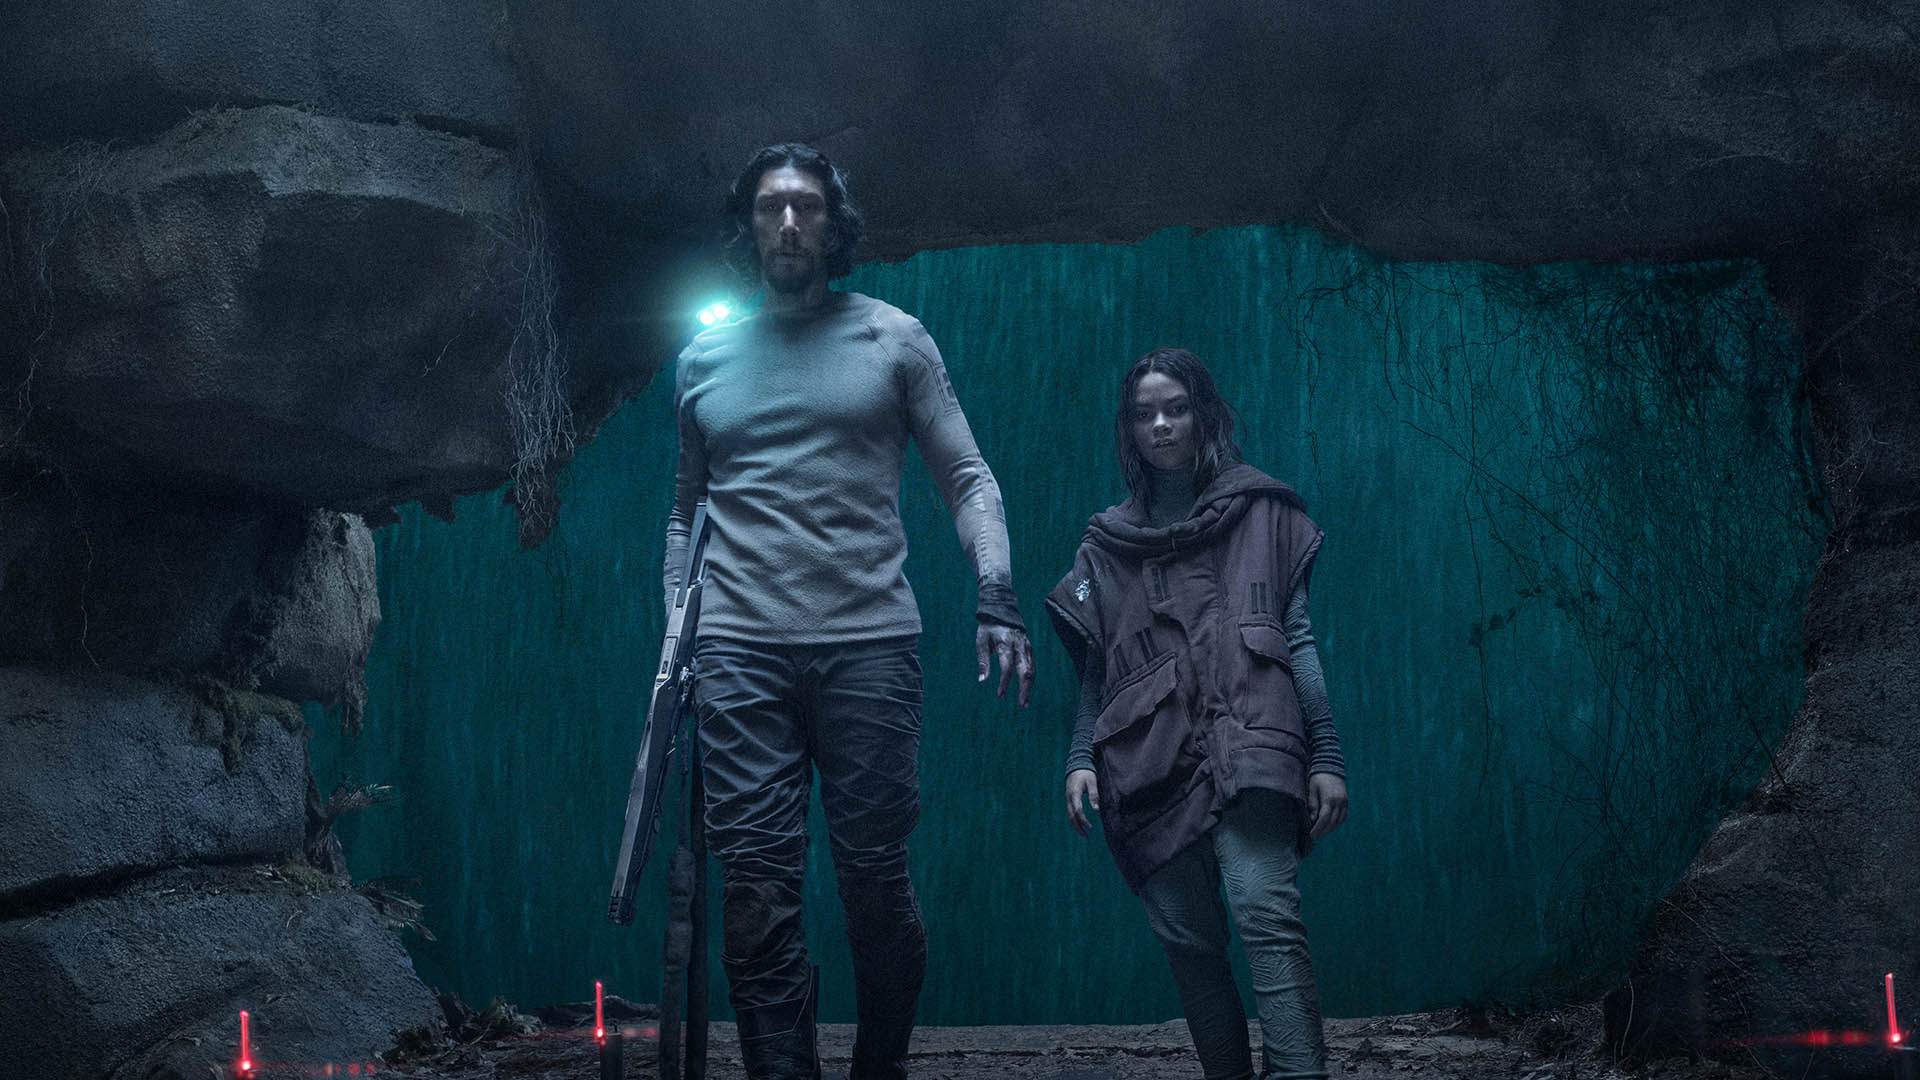 If You've Always Wanted to See Adam Driver Fight Dinosaurs, the Trailer for Sci-Fi Film '65' Delivers